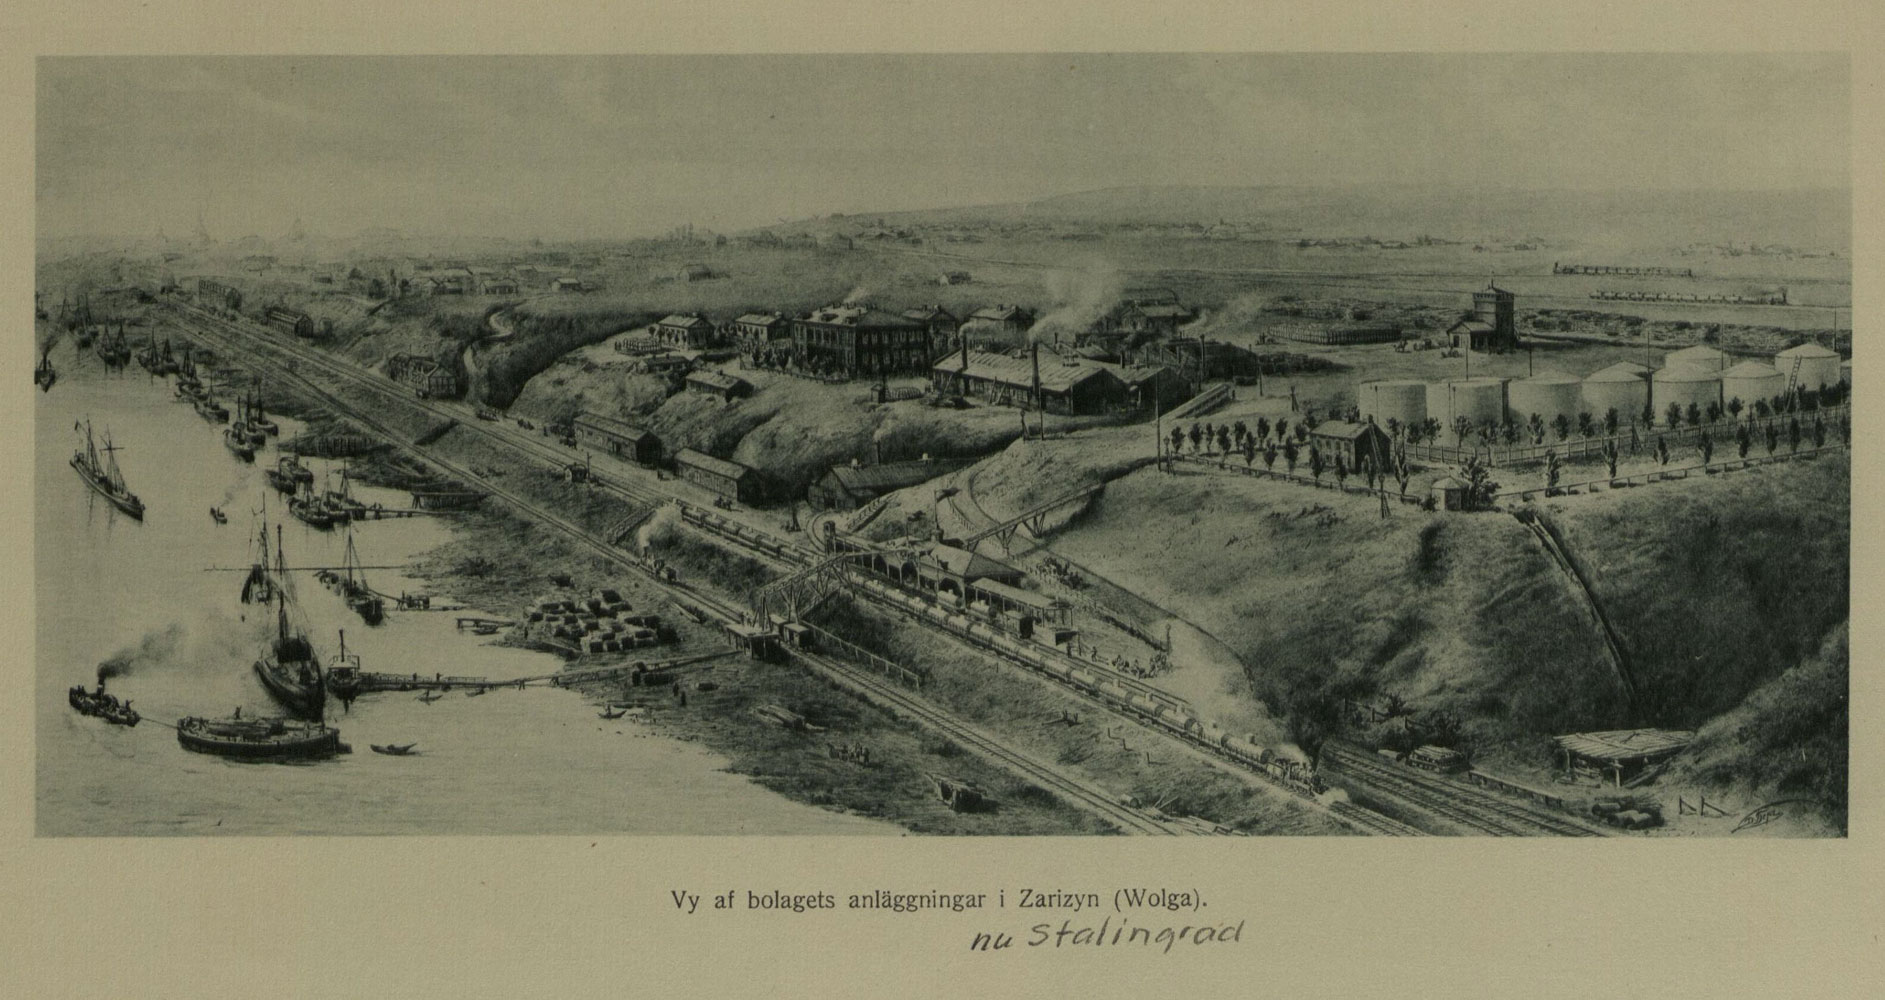 Tzaritsyn, the city where young Wilhelm Hagelin lived and worked before his employment at Branobel. Branobel river docks and oil depots in Tzaritzyn on Volga.